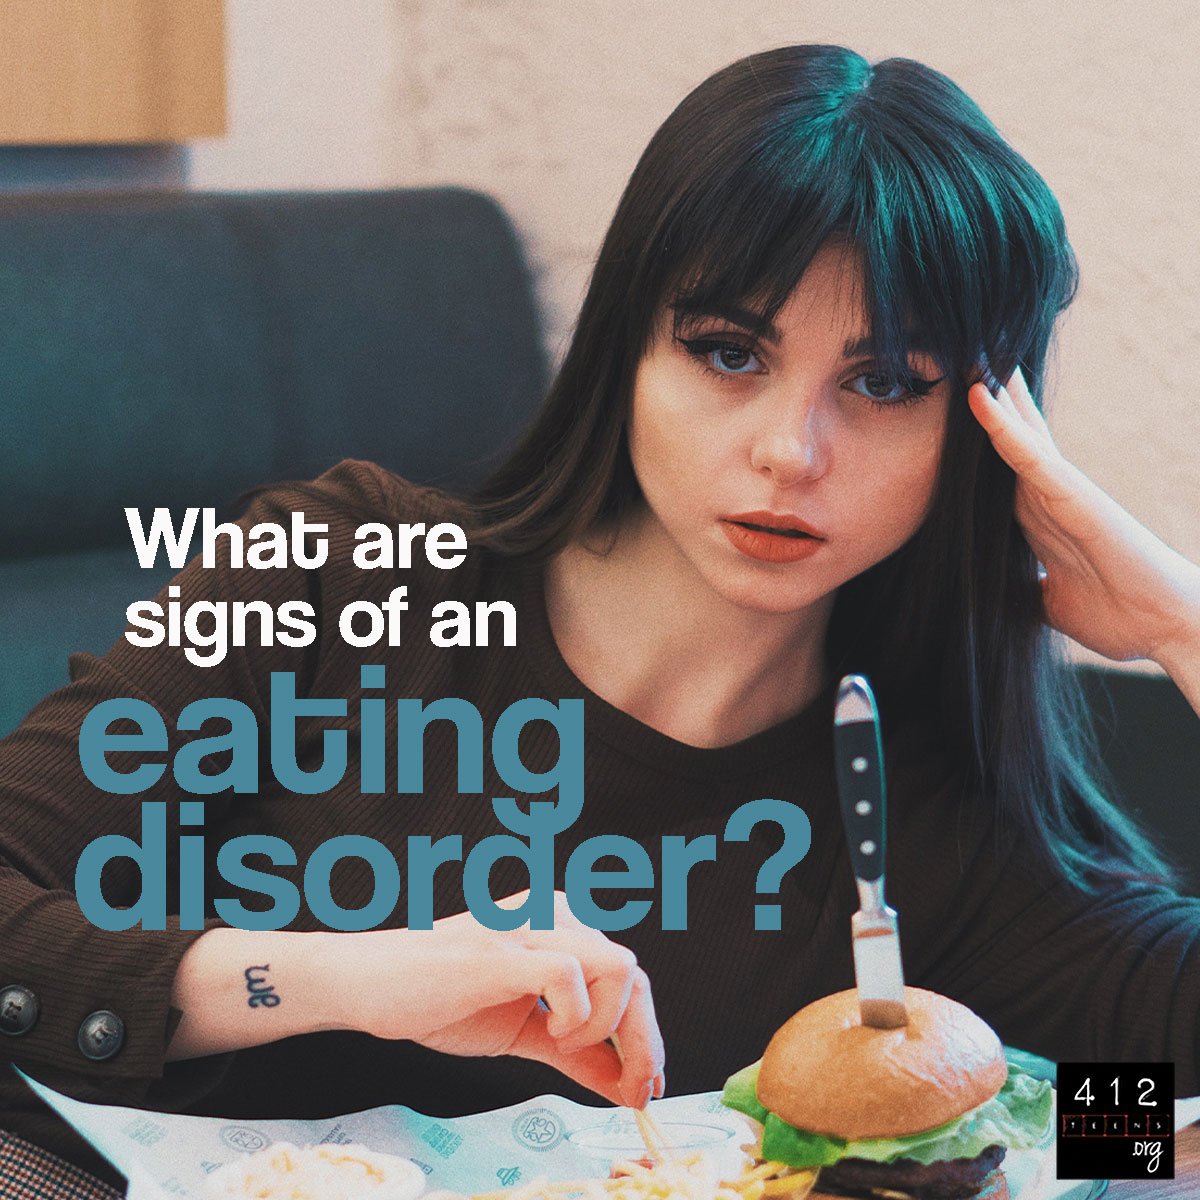 What are some signs of an eating disorder?